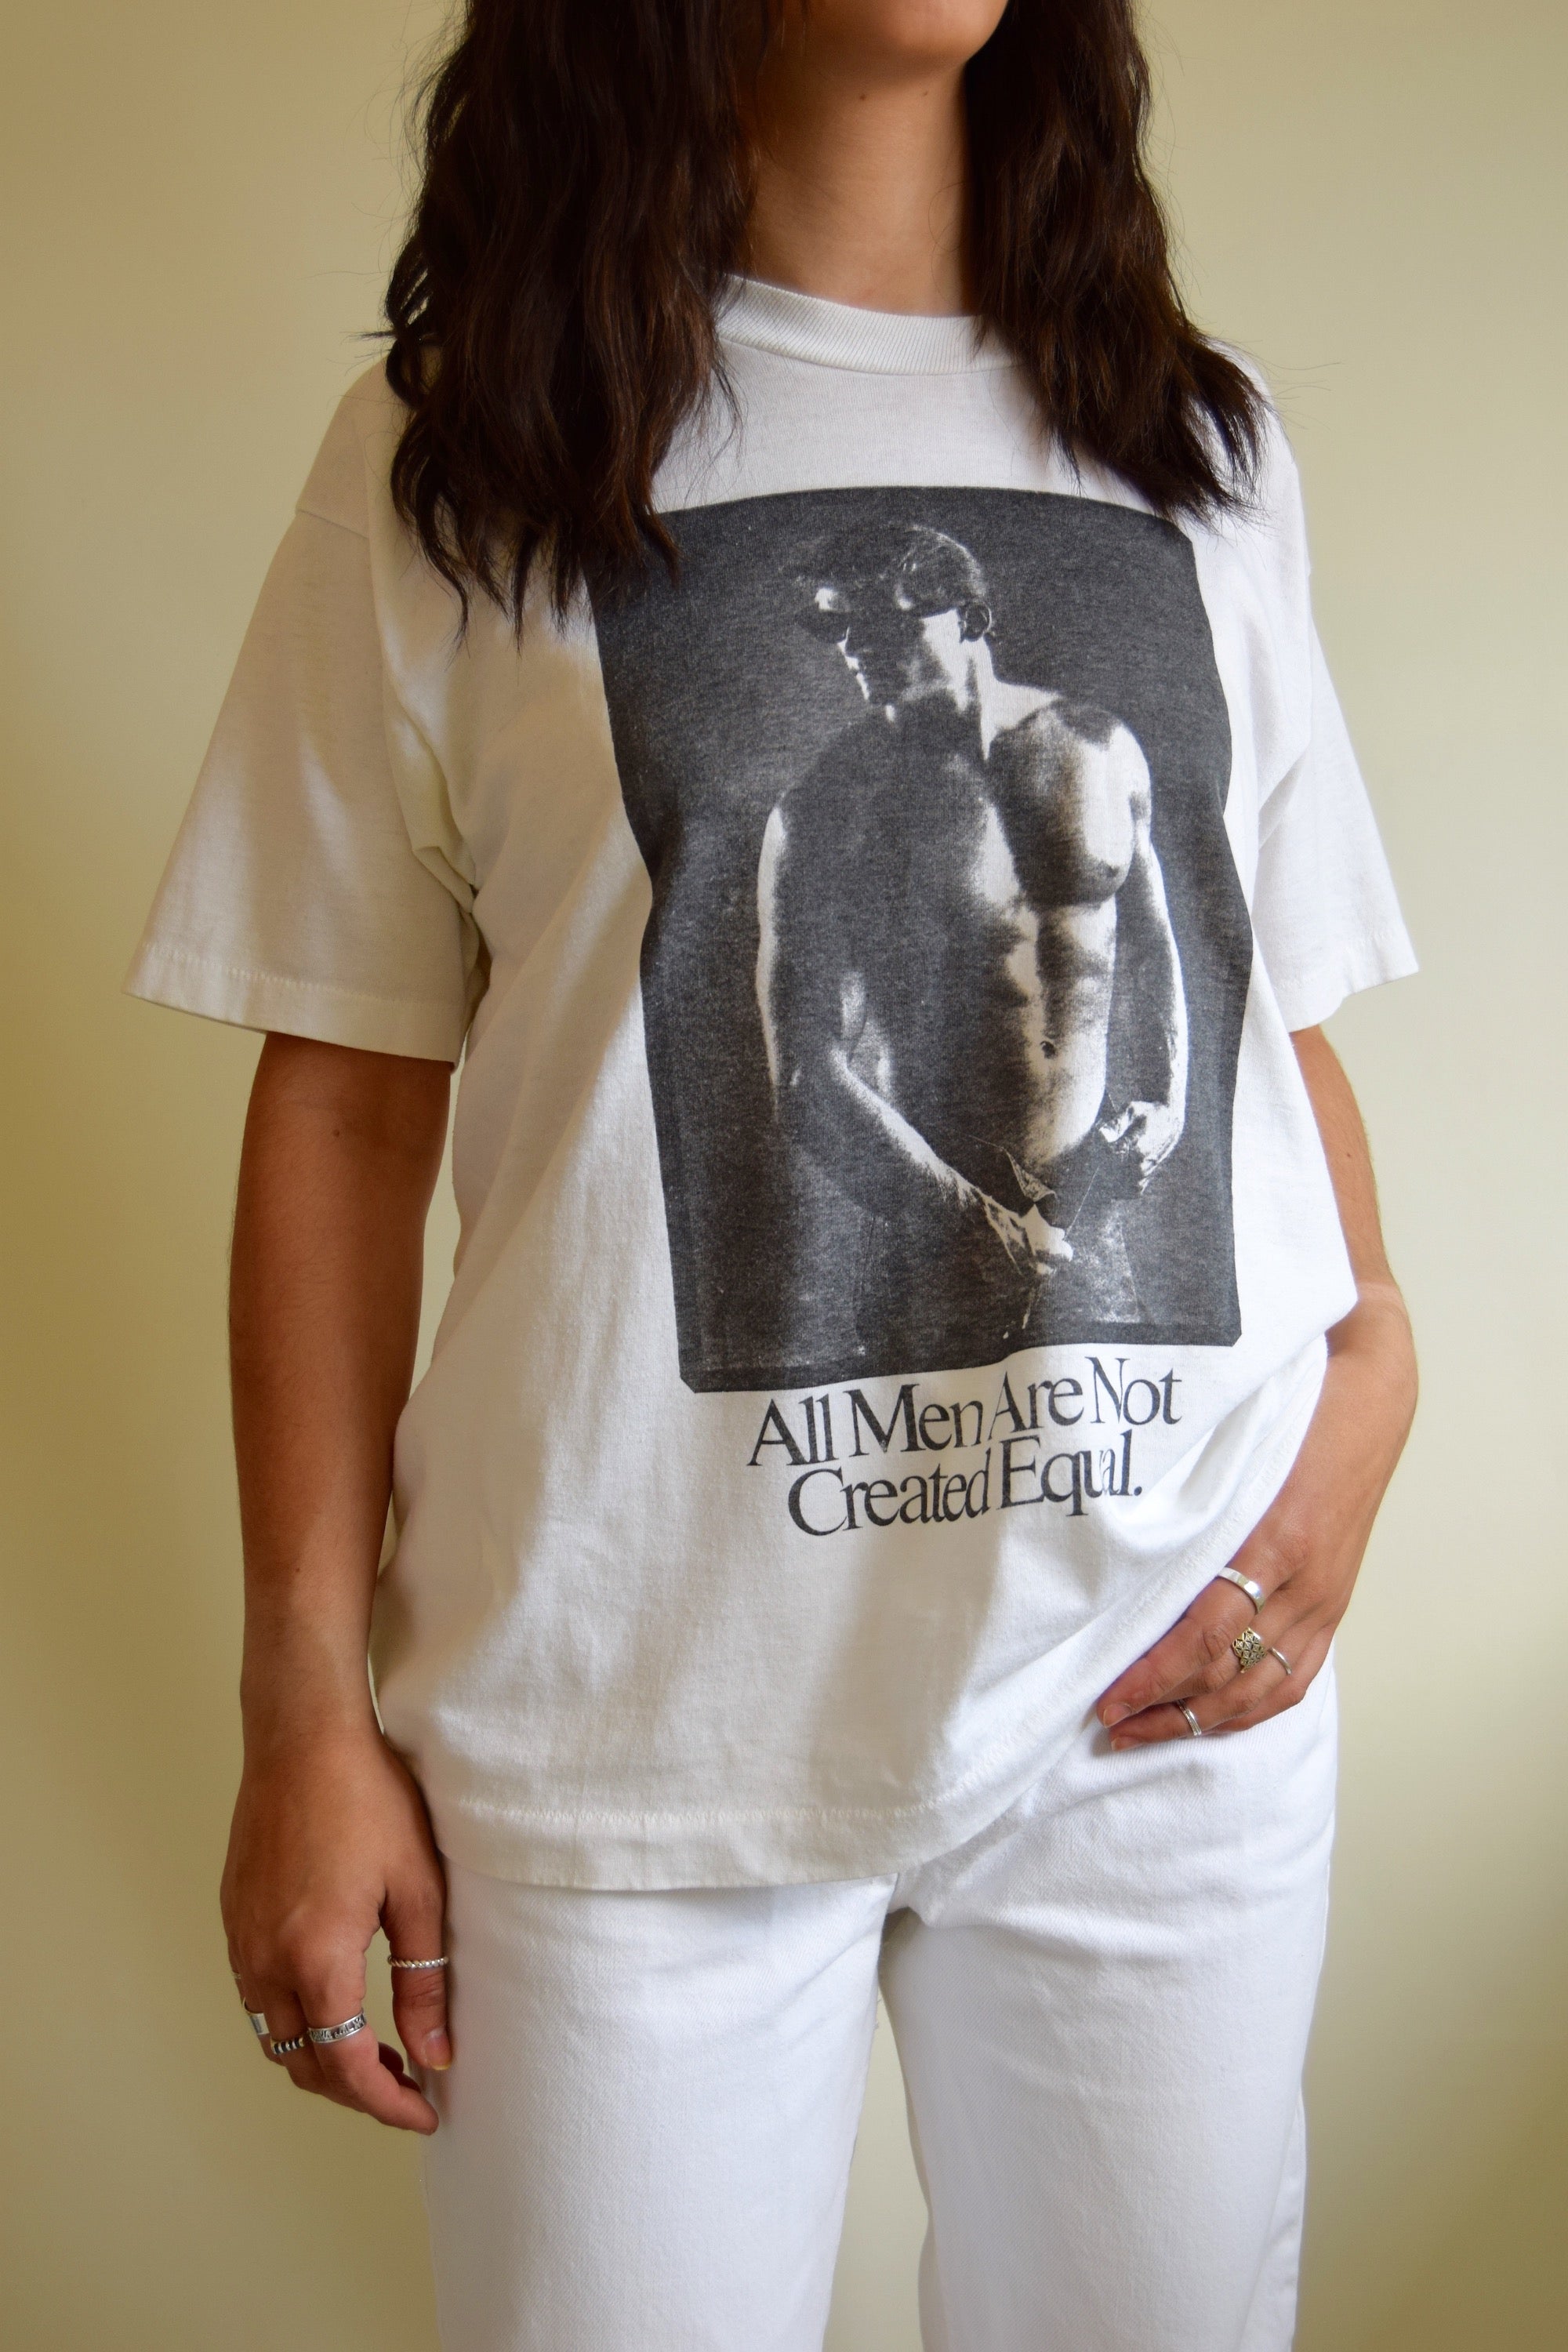 Vintage "Not All Men Are Created Equal" T-Shirt